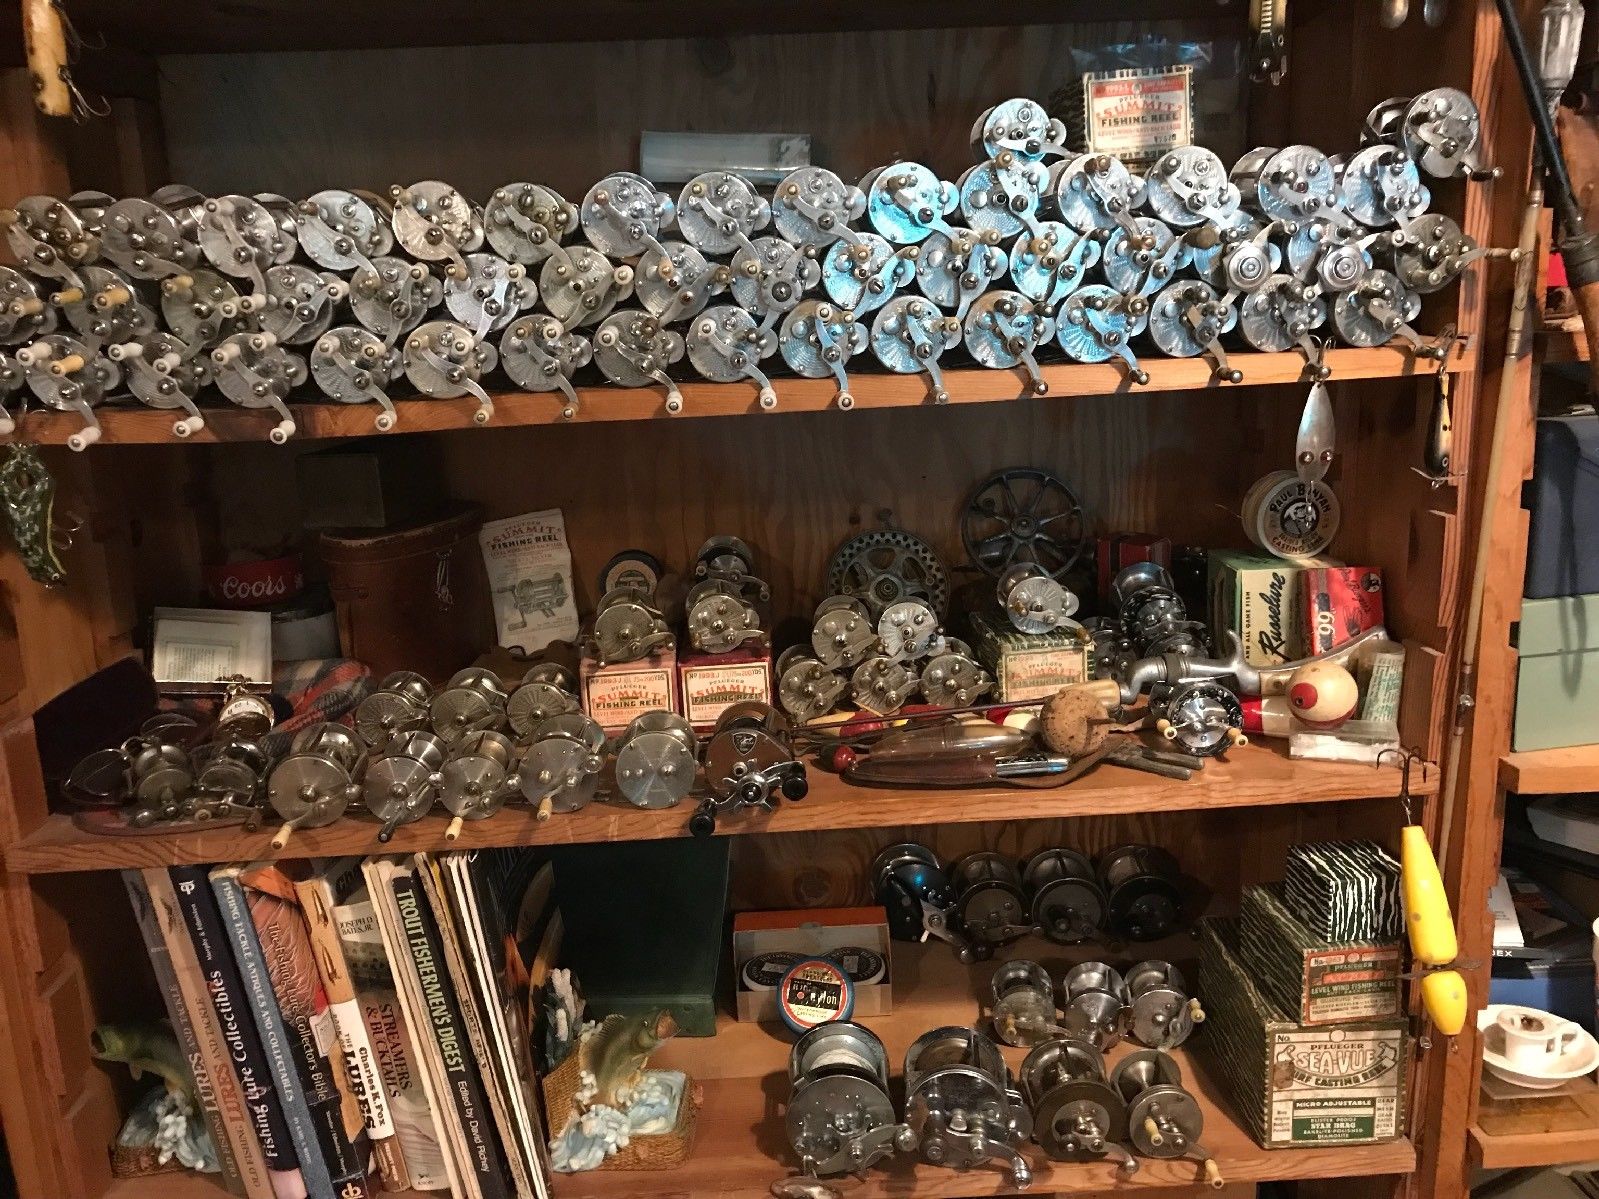 VINTAGE PFLUEGER FISHING REEL COLLECTION - WOW - that's a lot of